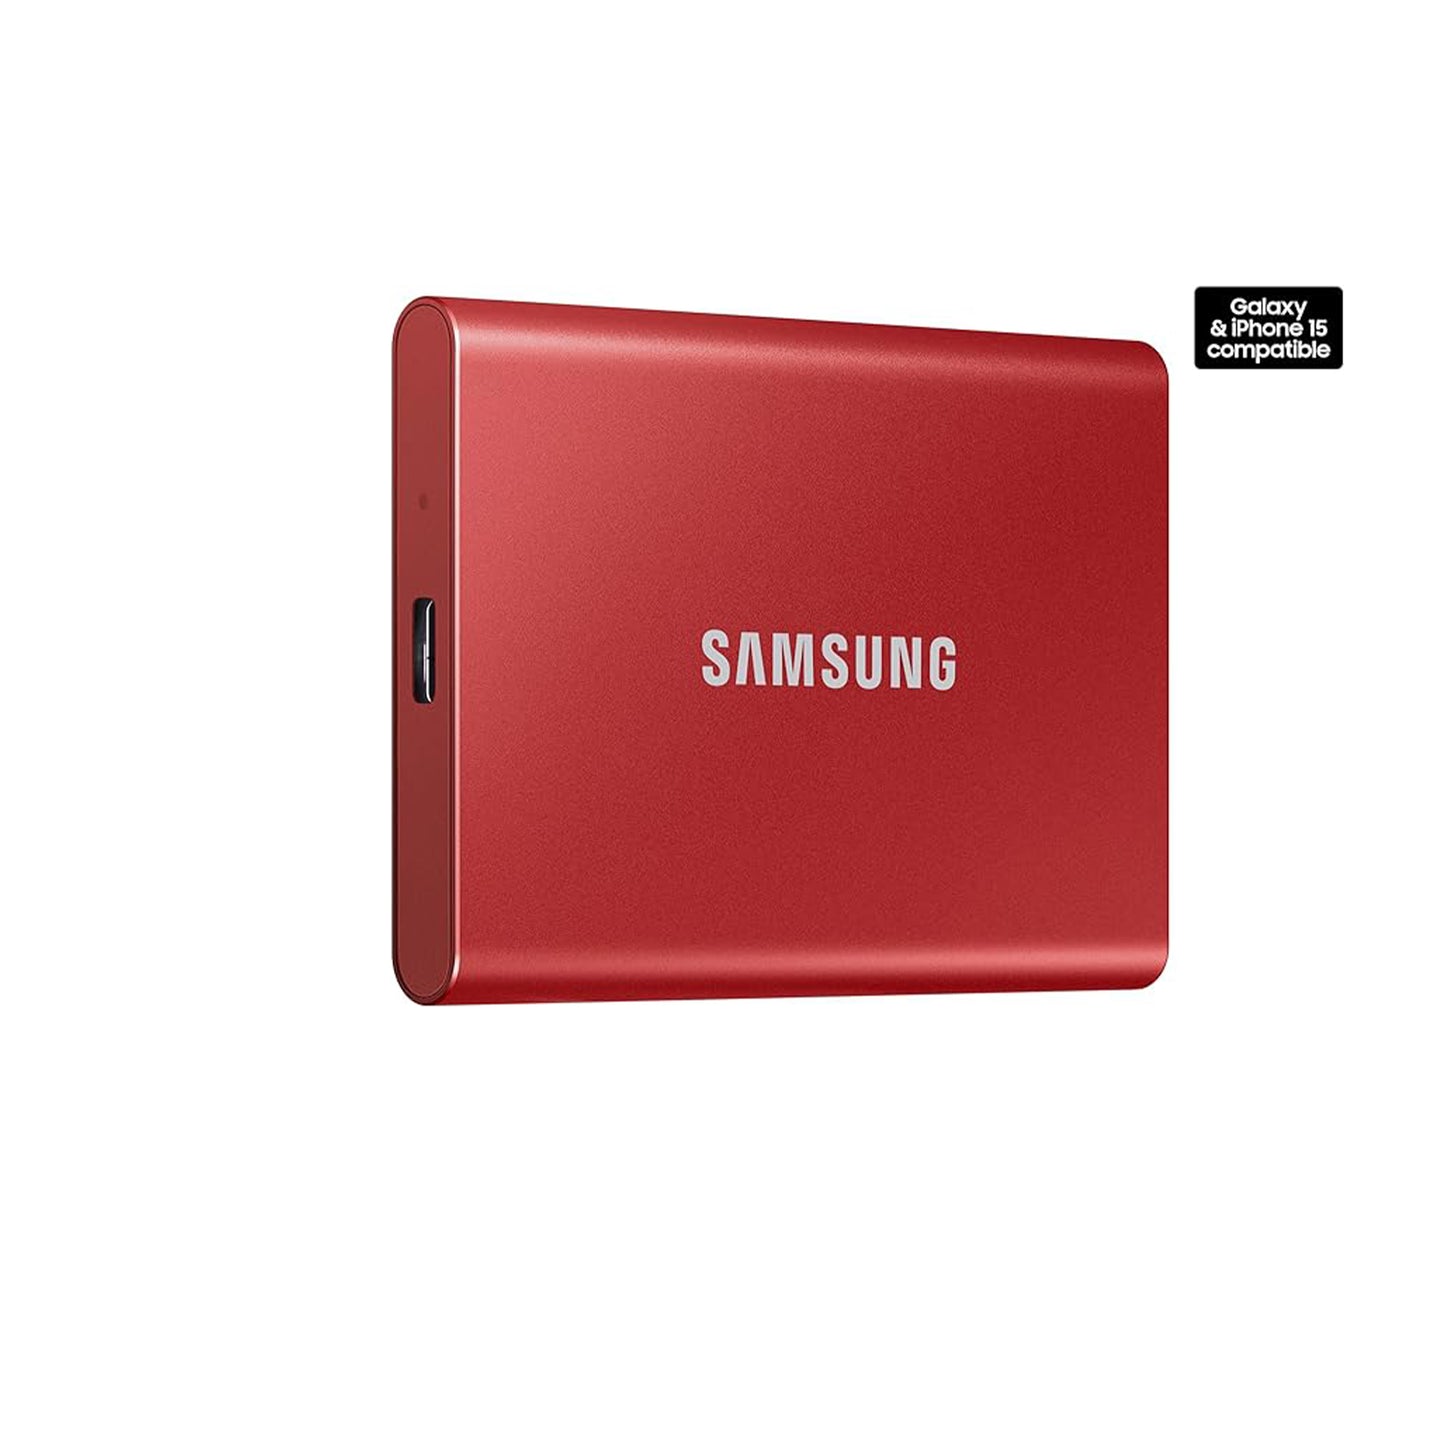 SAMSUNG SSD T7 Portable External Solid State Drive 1TB, Up to USB 3.2 Gen 2, Reliable Storage for Gaming, Students, Professionals, MU-PC1T0R/AM, Red